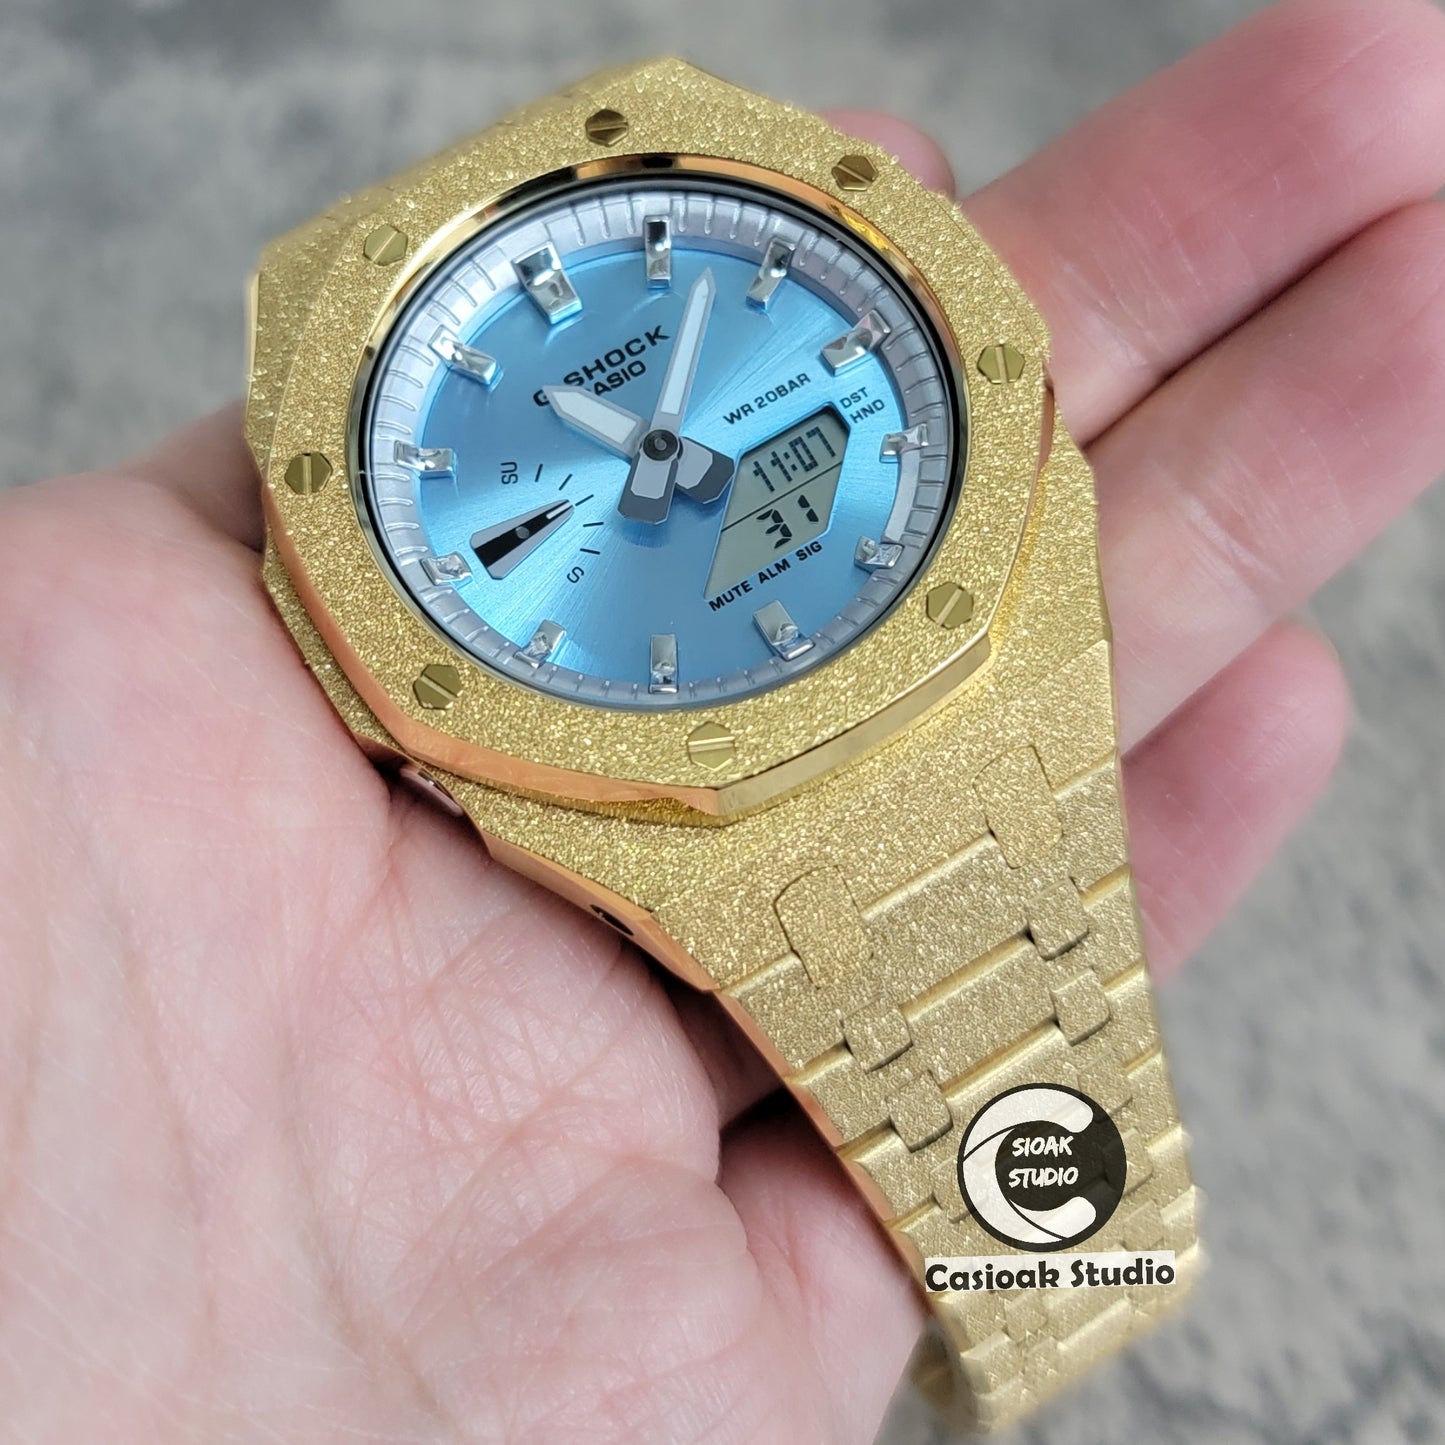 Casioak Mod Watch Frosted Gold Case Metal Strap Silver Time Mark Ice Blue Dial 44mm - Casioak Studio